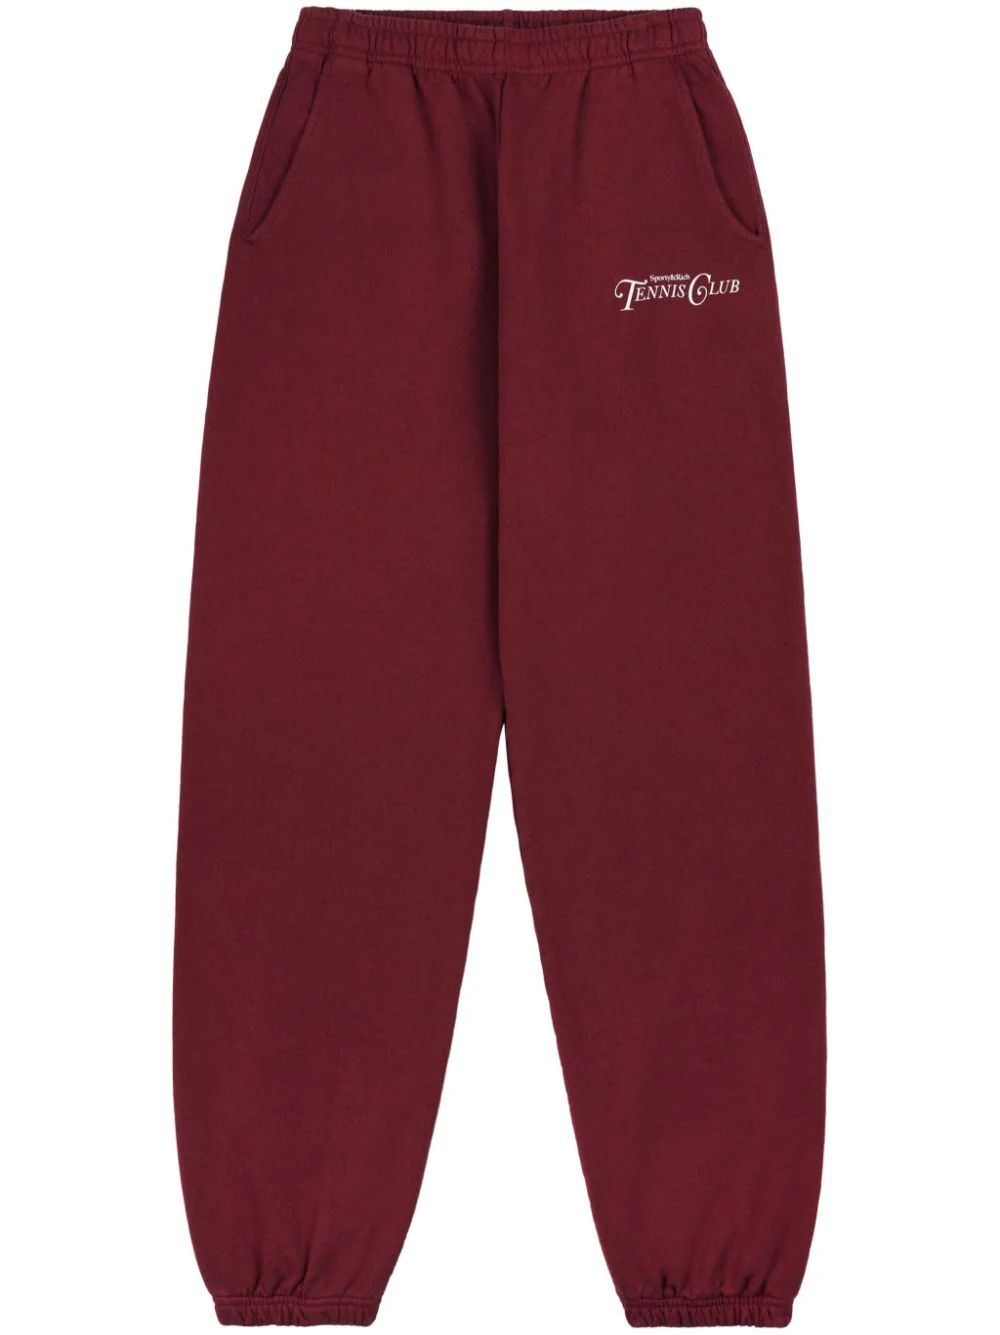 The DetailsSporty & RichRizzoli cotton track pantsMade in United StatesHighlightsbordeaux red cot... | Farfetch Global